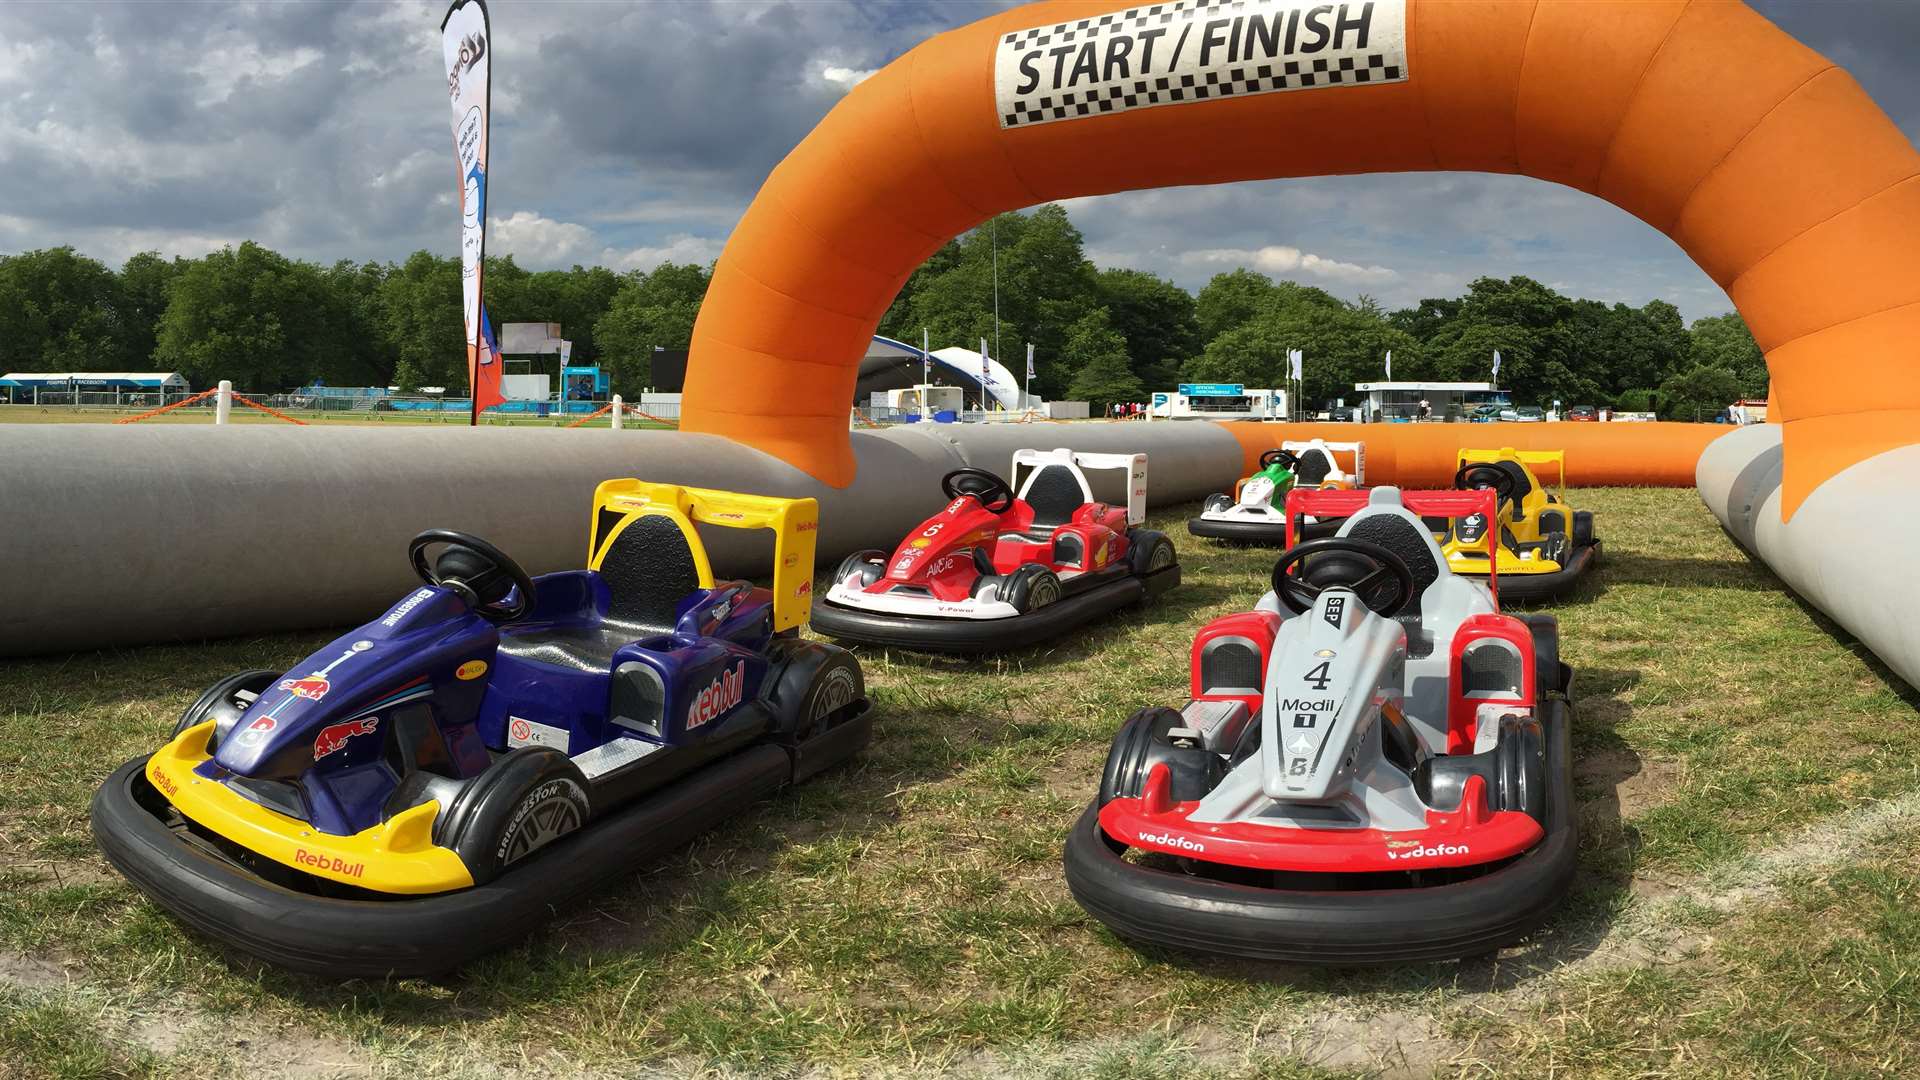 Racing fun at Bluewater this weekend